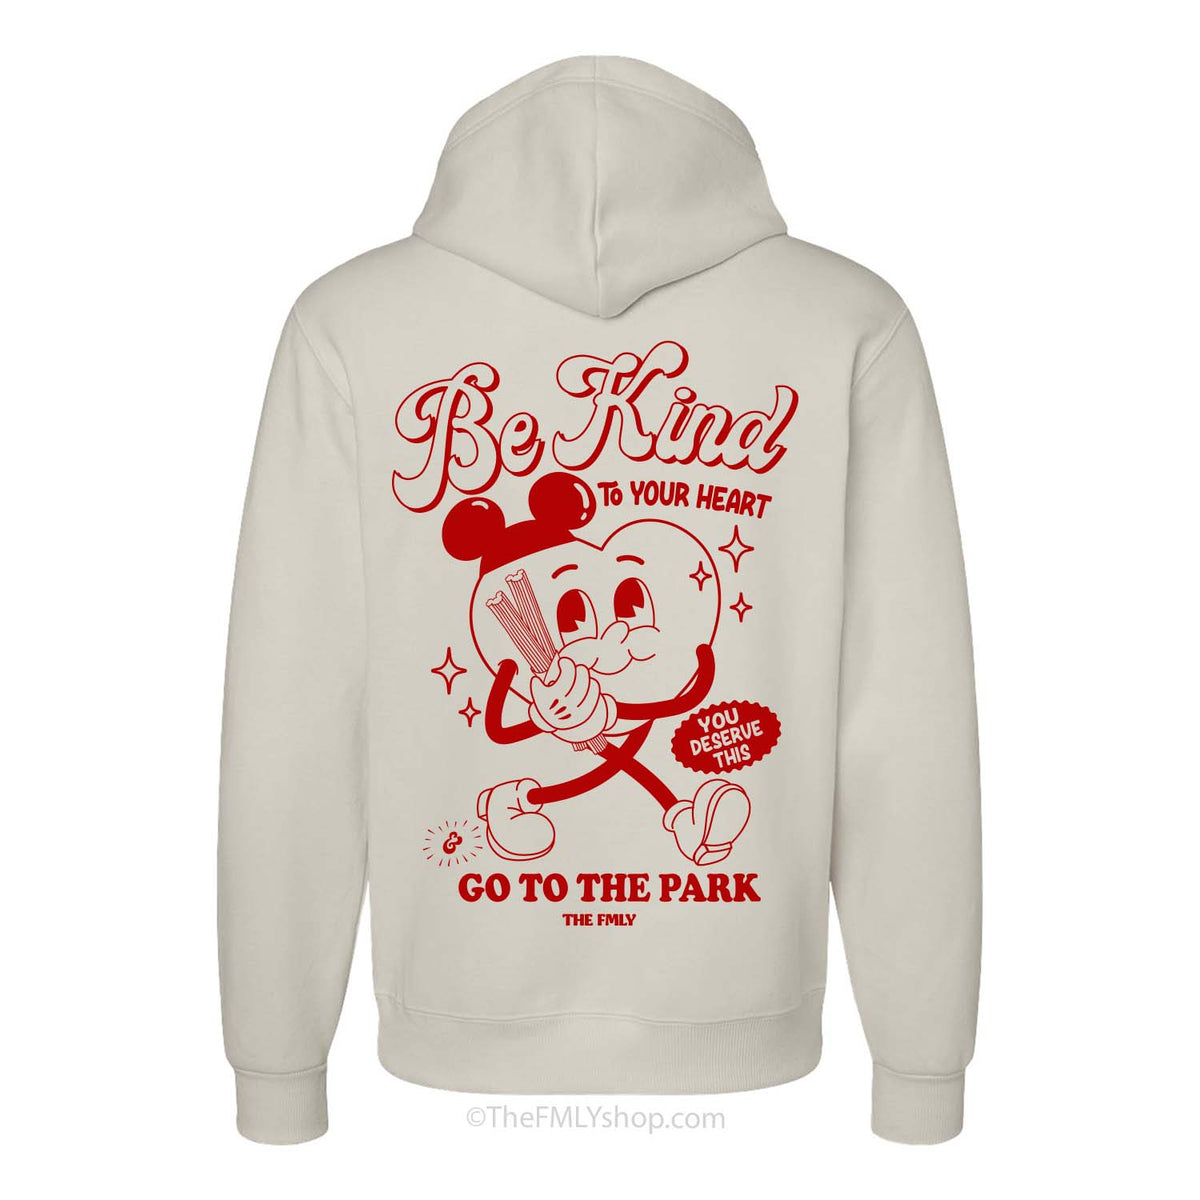 Cozy cream fleece Disney-inspired hoodie with "Be Kind To Your Heart" message